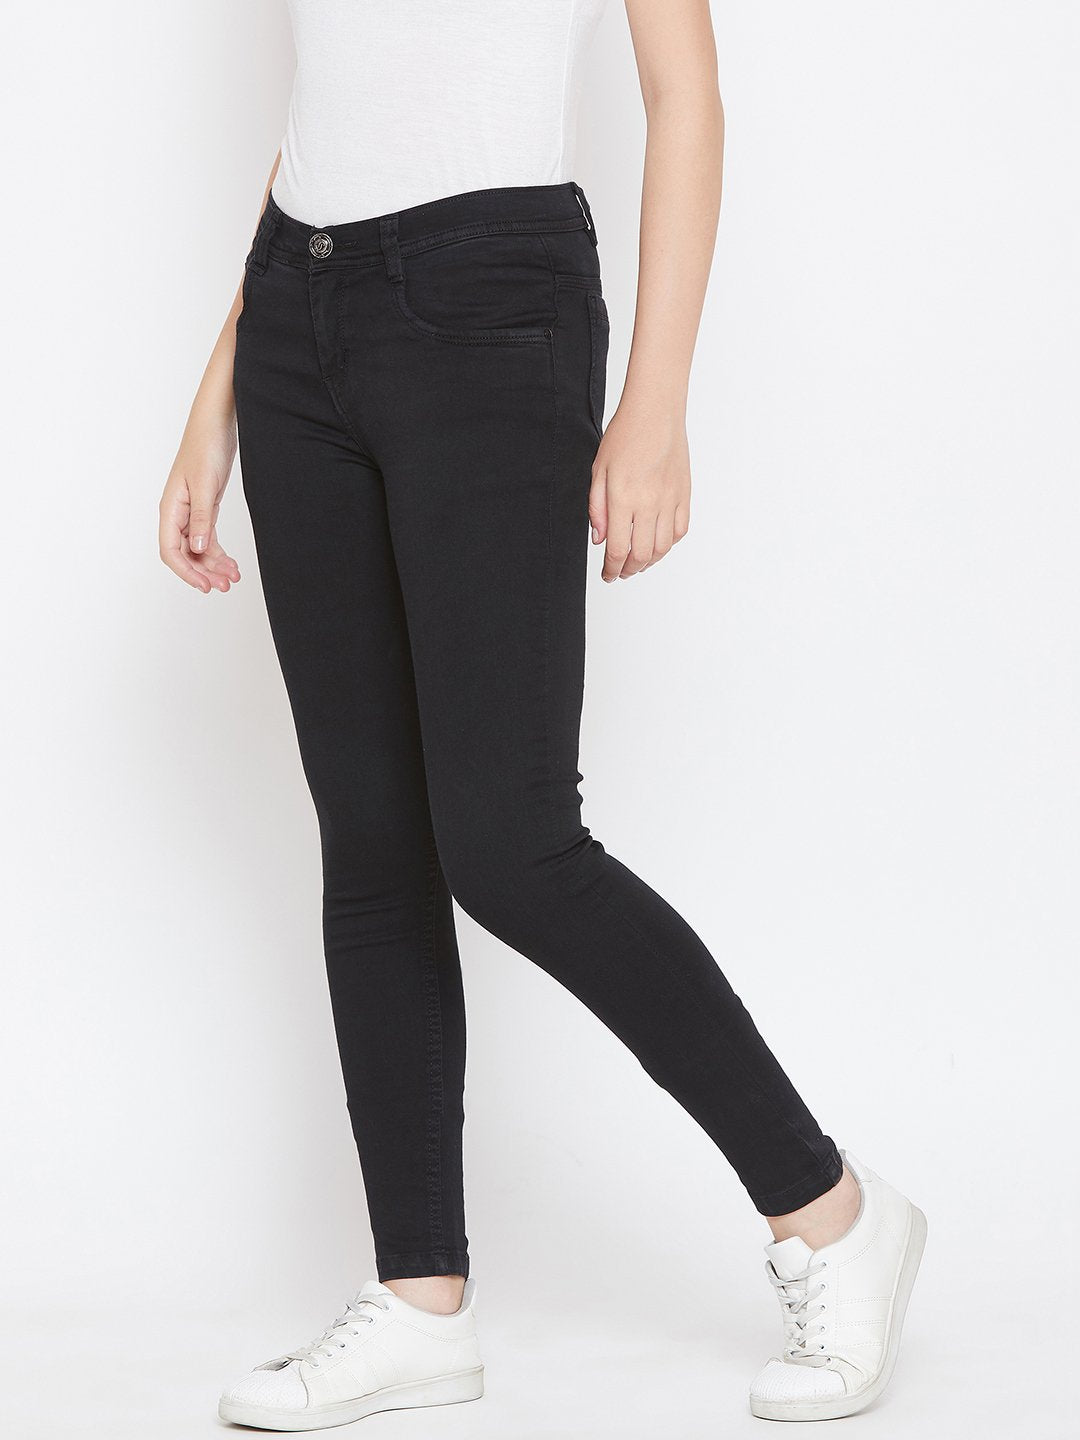 Slim Fit Stretchable Black Jeans - NiftyJeans